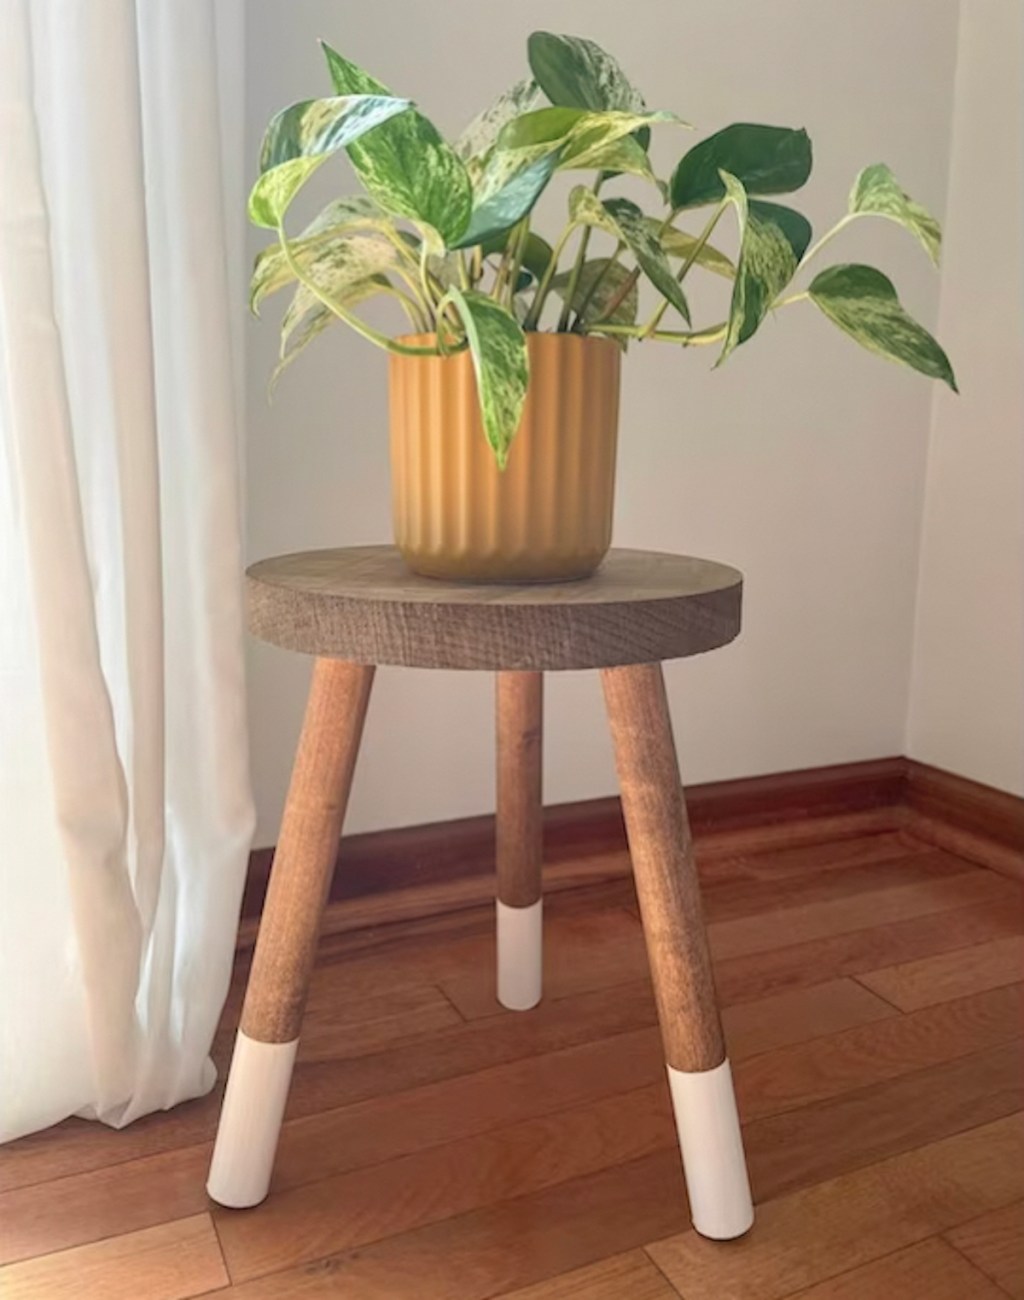 wood white dipped stool with planter on top